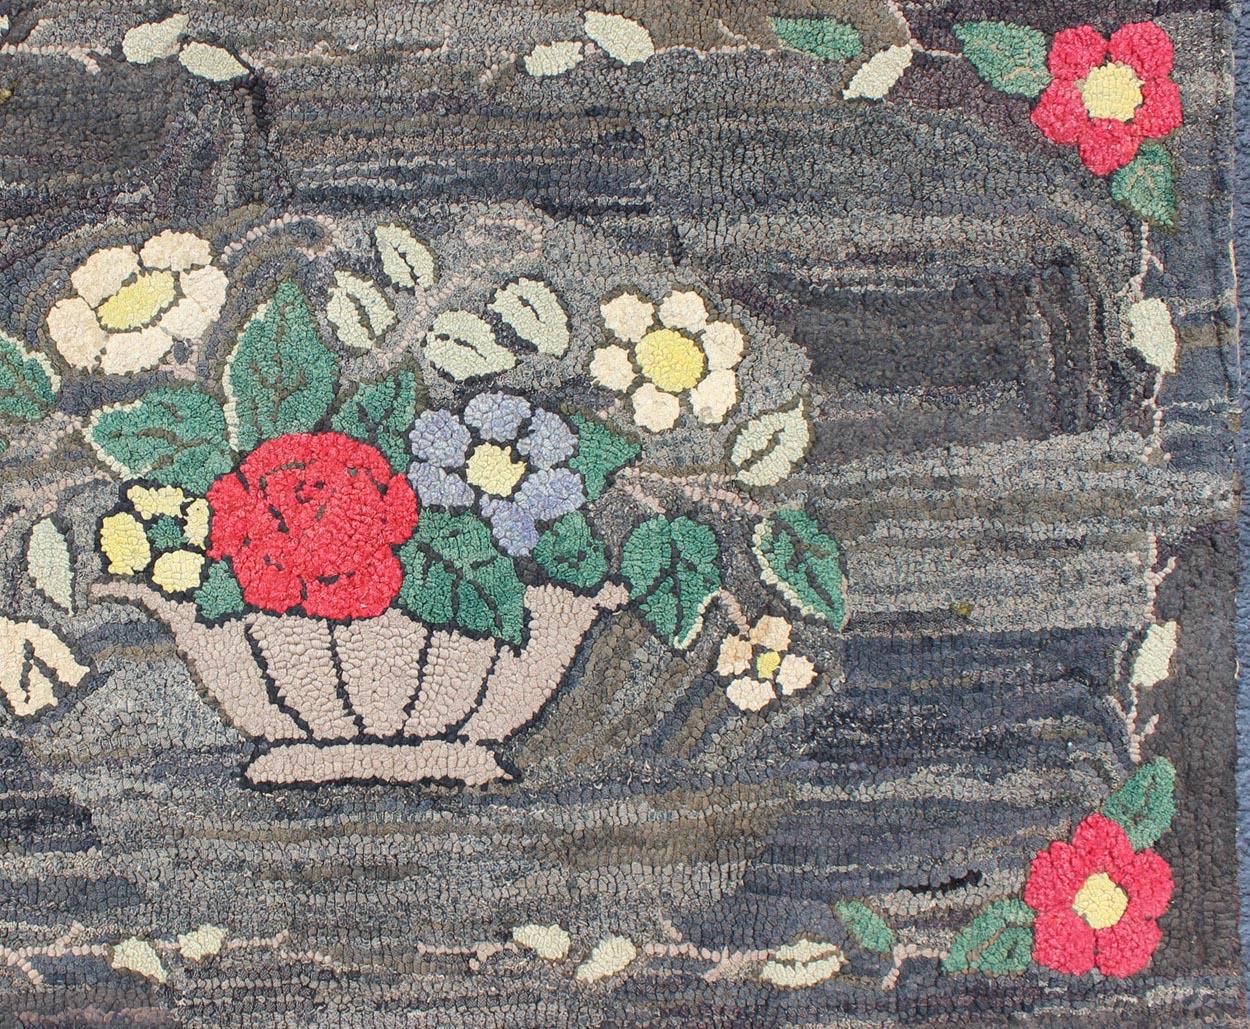 Charcoal, red, and green antique American Hooked rug with large flower design, Keivan Woven Arts / rug S12-0807, country of origin / type: United States / Hooked, circa 1900

This colorful vintage American Hooked rug depicts a variety of vines and